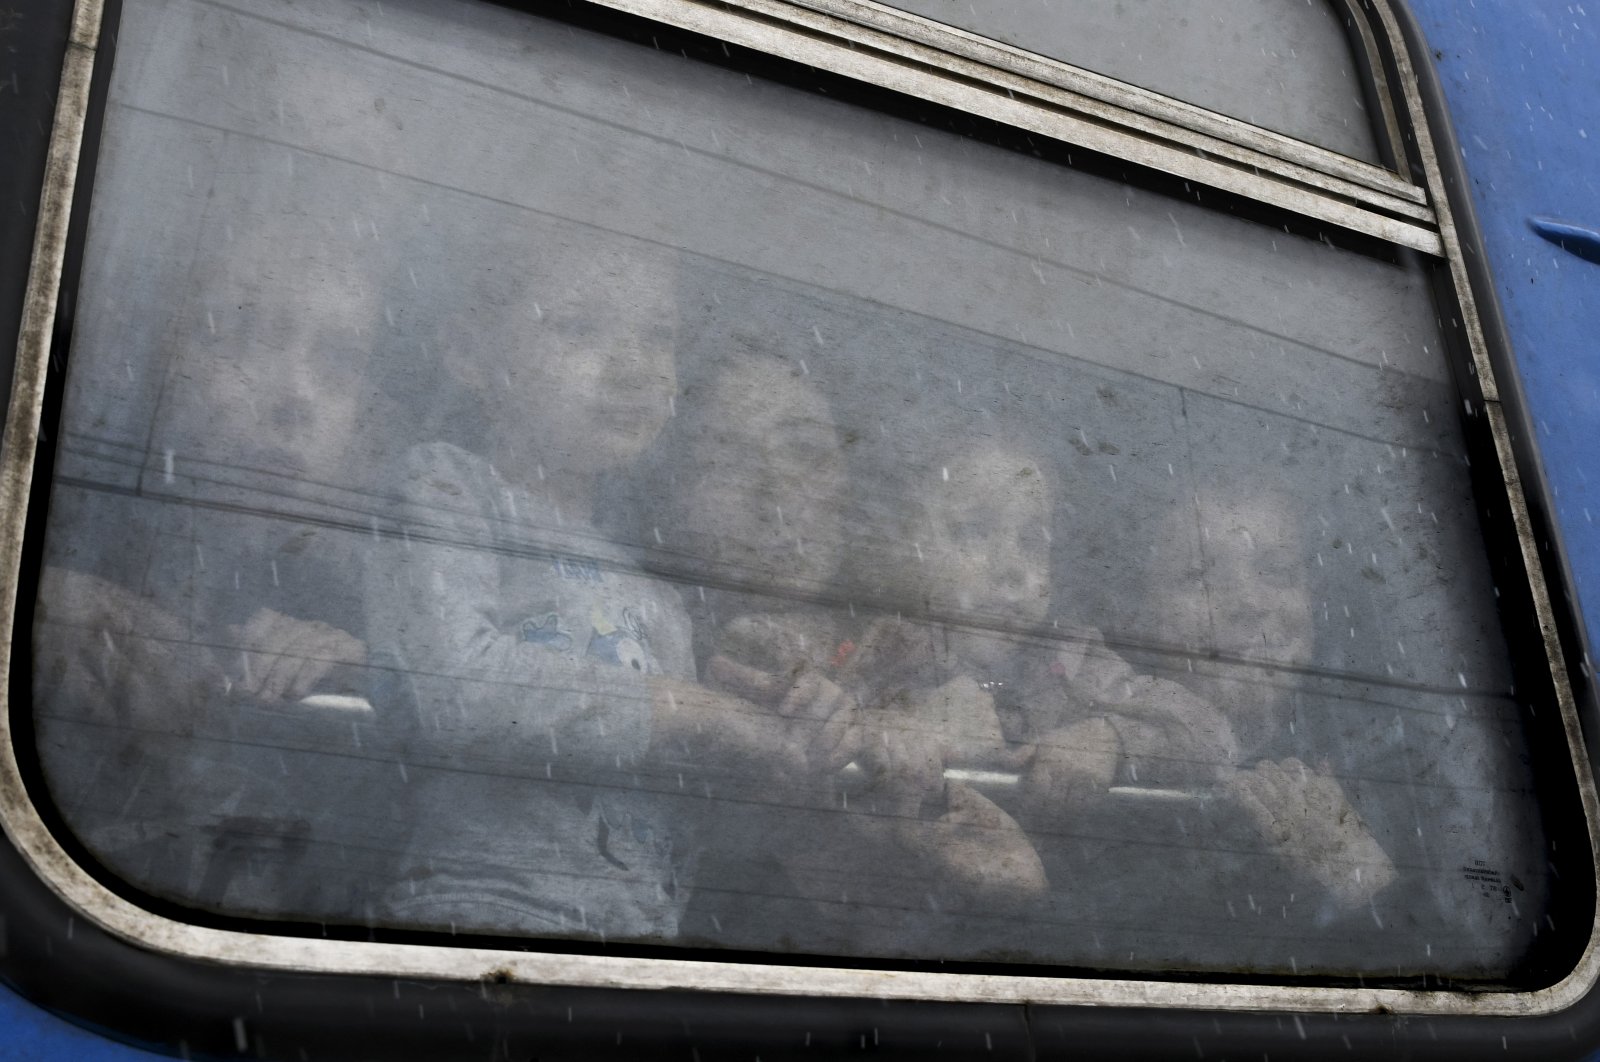 Children watch from a train carriage, waiting to leave to western Ukraine amid the Russian invasion of Ukraine, at the railway station in Kramatorsk, Ukraine, March 9, 2022. (AP Photo)